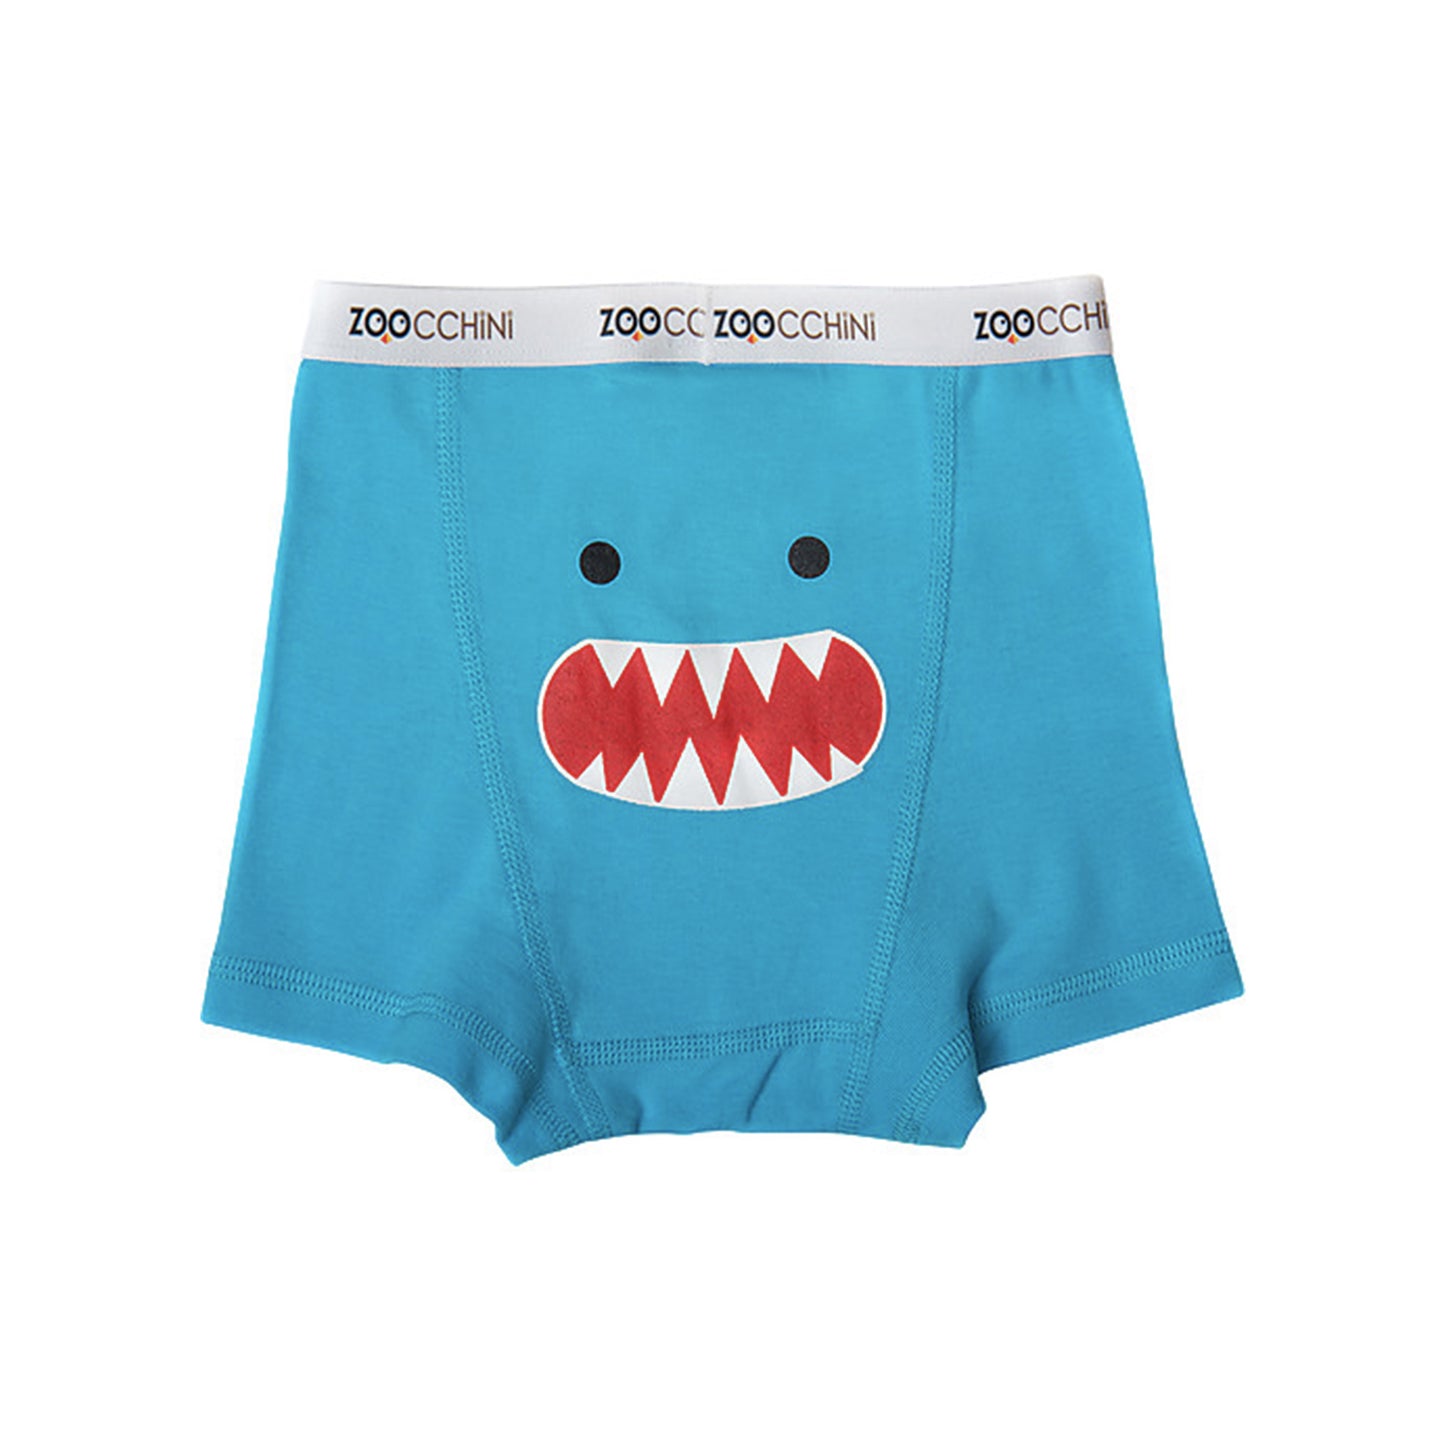 Zoocchini - Monster Friends Boy's Boxers - Pack of 3, 100% Organic Cotton